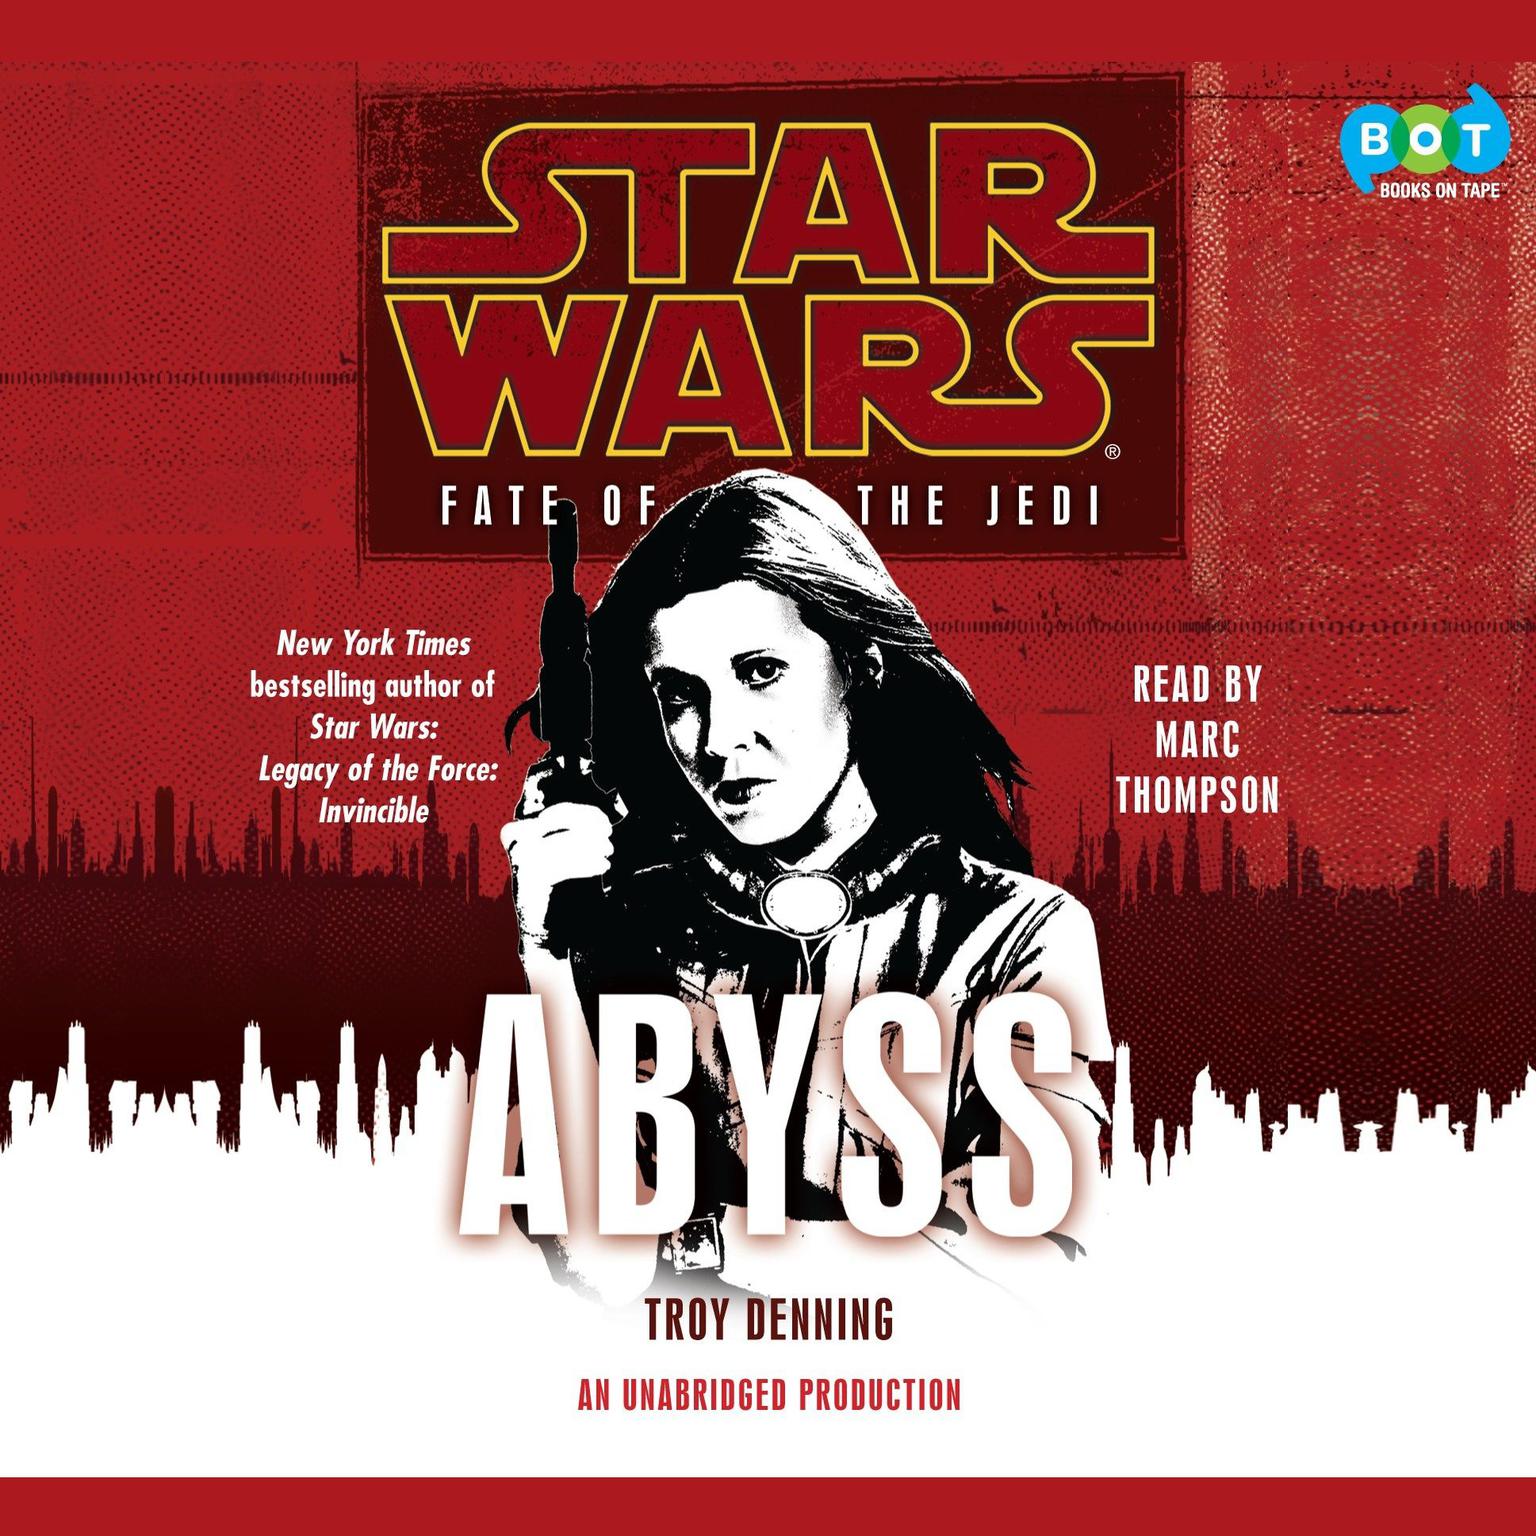 Abyss: Star Wars (Fate of the Jedi) Audiobook, by Troy Denning